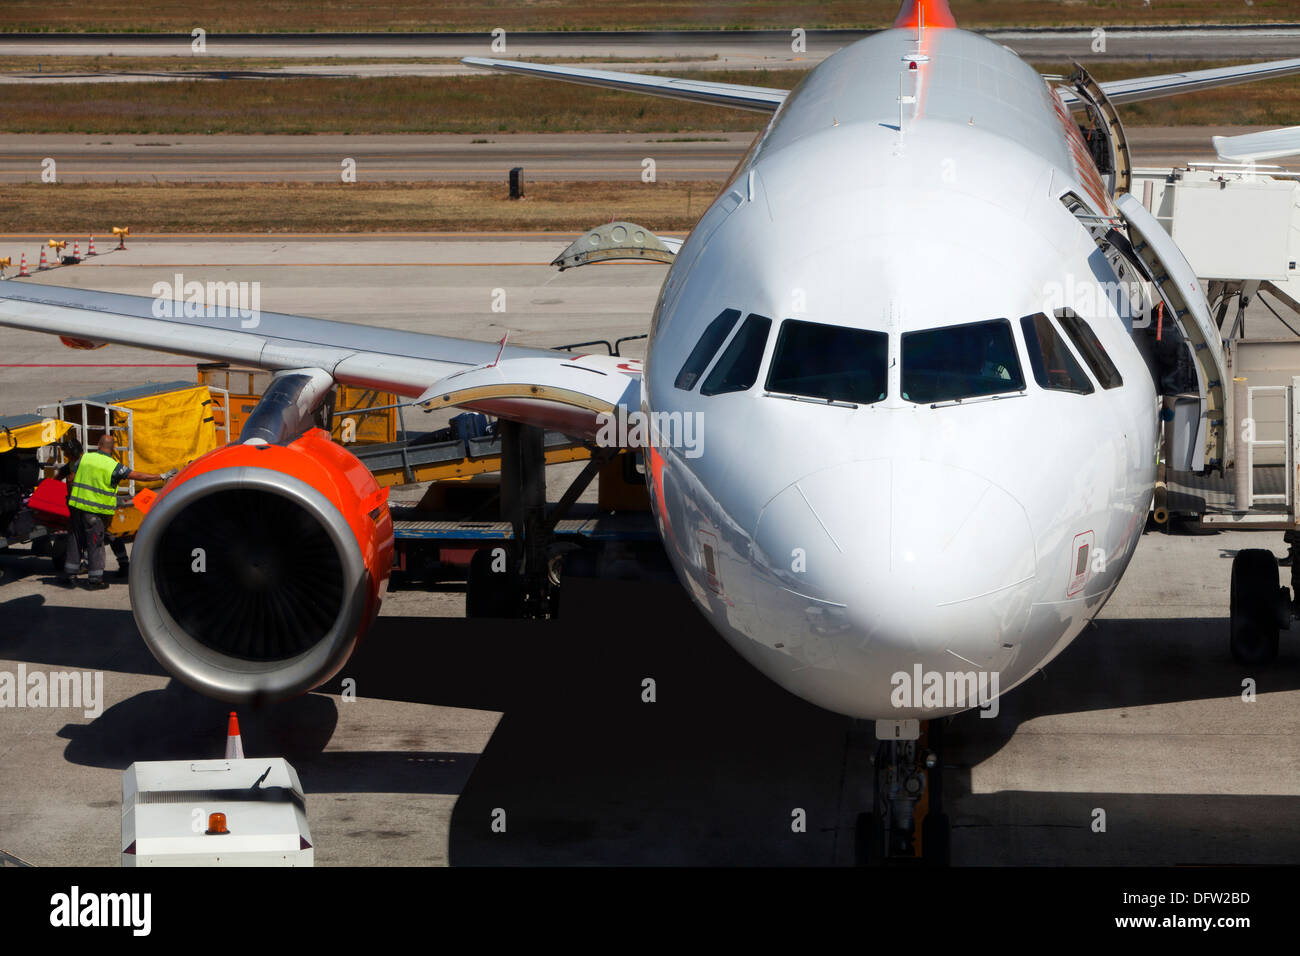 Baggage handlers loading an aircraft prior to take off Stock Photo